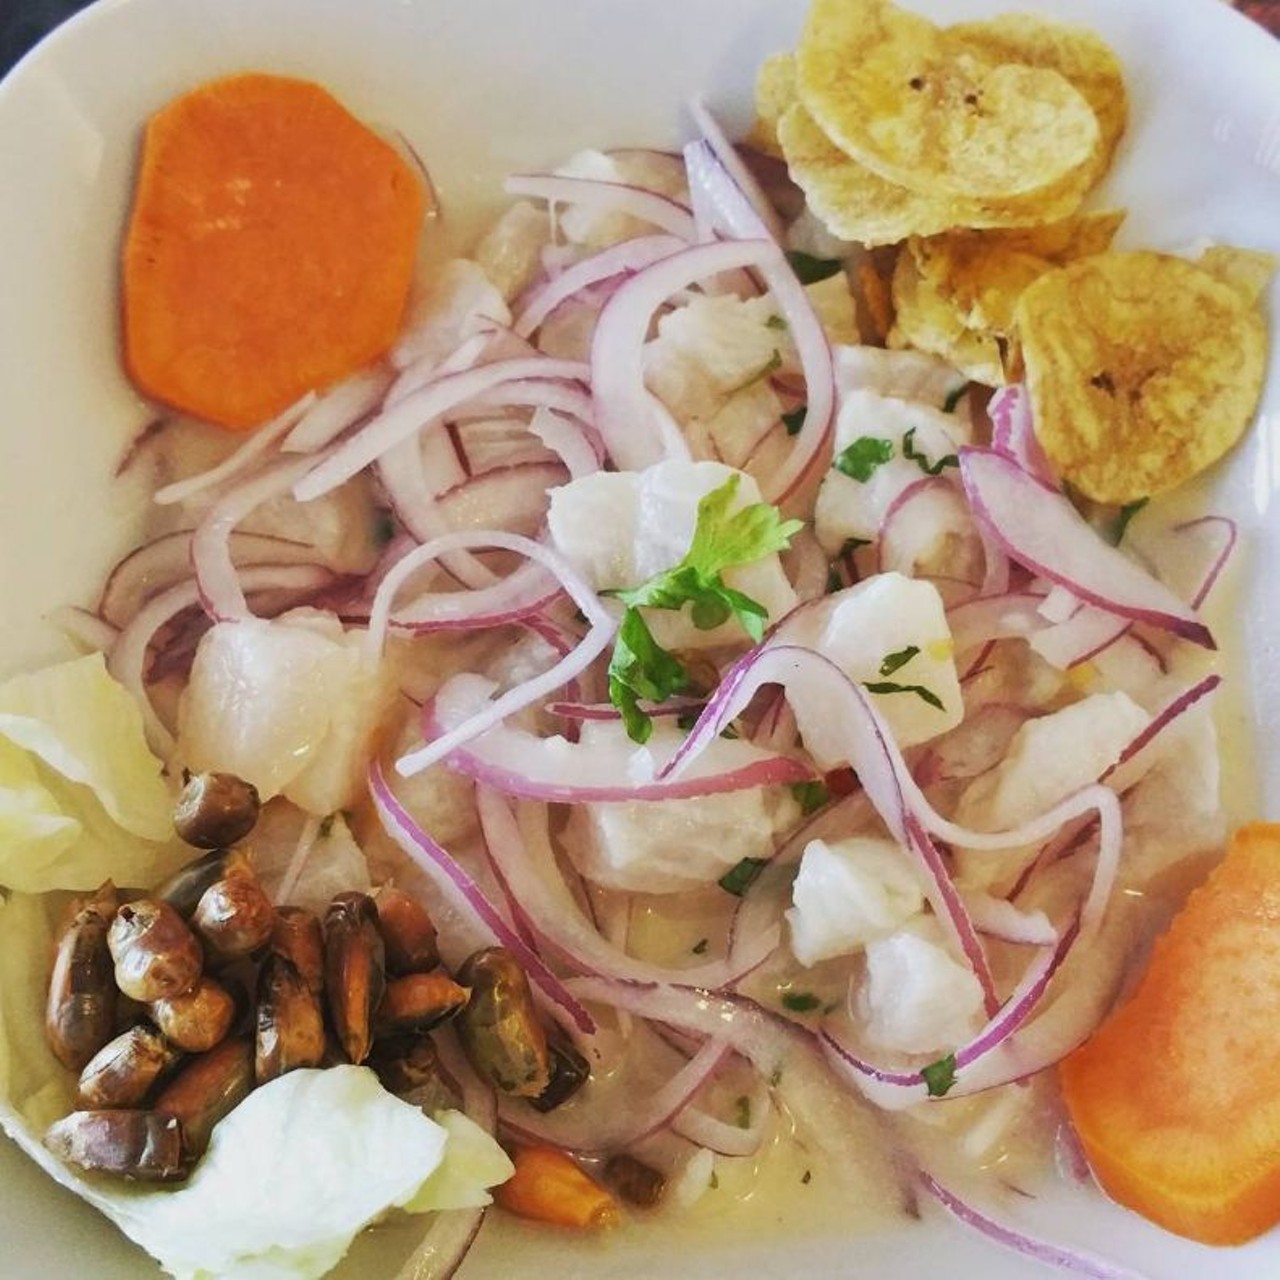 What we recommend: ceviche de pescado 
This ceviche de pescado is touted as some of the best in Orlando. Prepared with fresh shrimp, fish and octopus marinated in citrus juices and spices and topped with red onion, corn and plantain chips, this is the epitome of seafood in one dish. 
Photo via blownasunder/Instagram